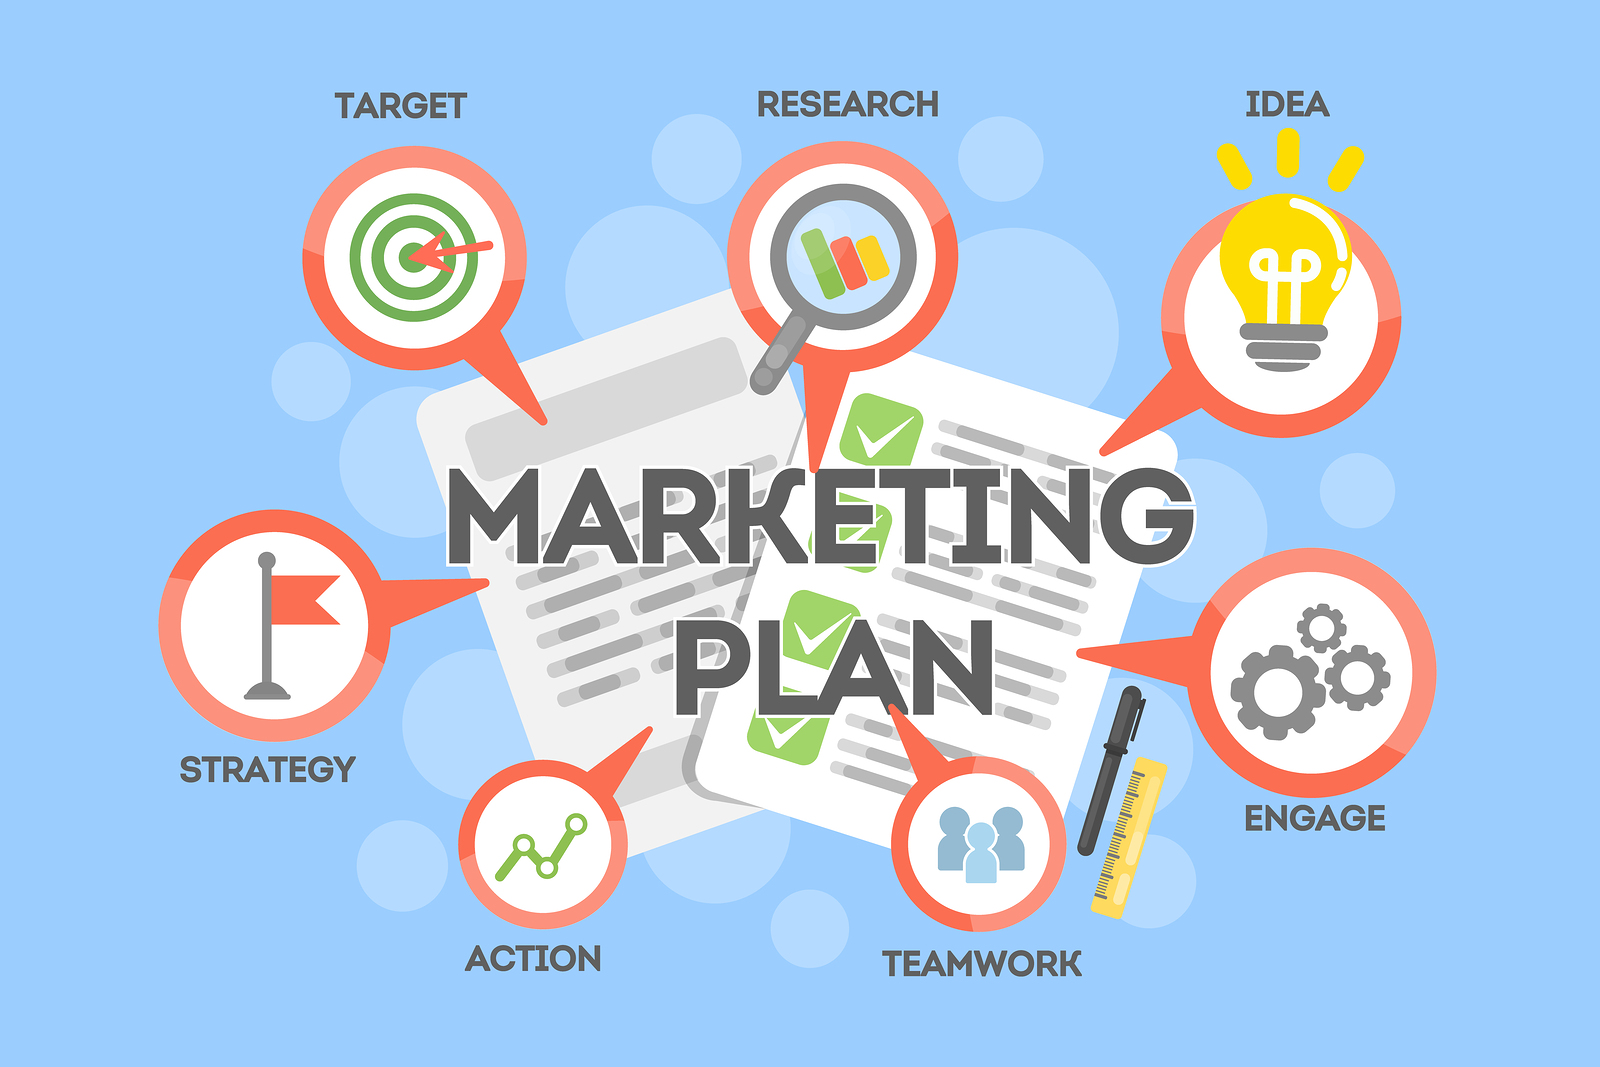 How to build a strategic marketing plan for 2019. Part 4 of 4